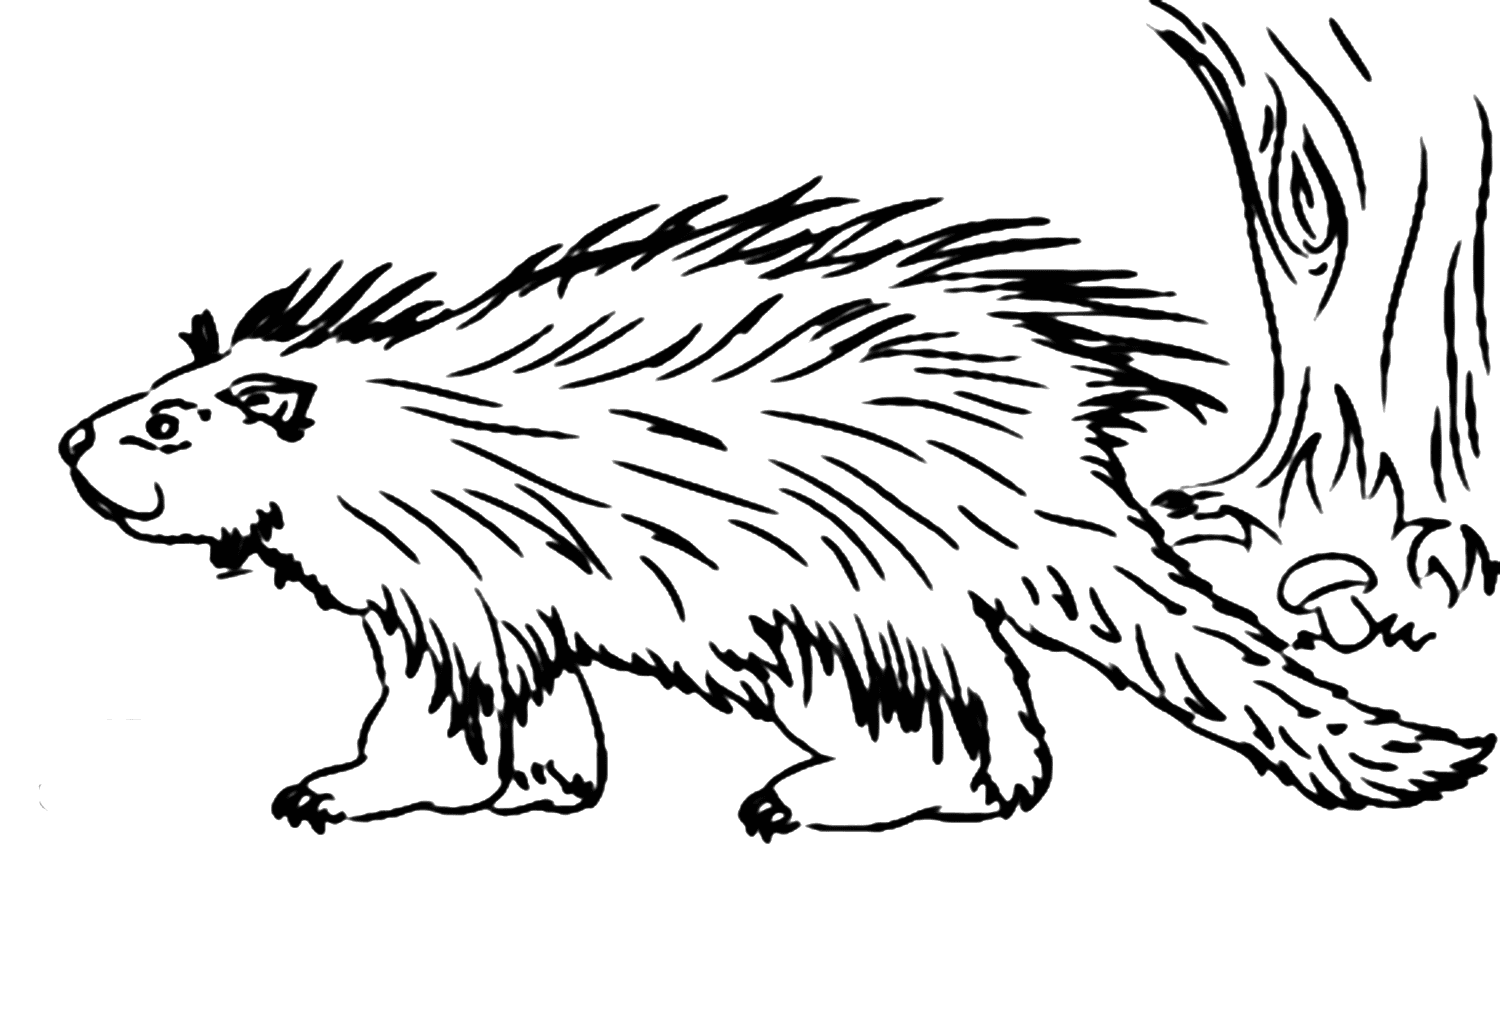 Porcupine Picture To Color from Porcupine